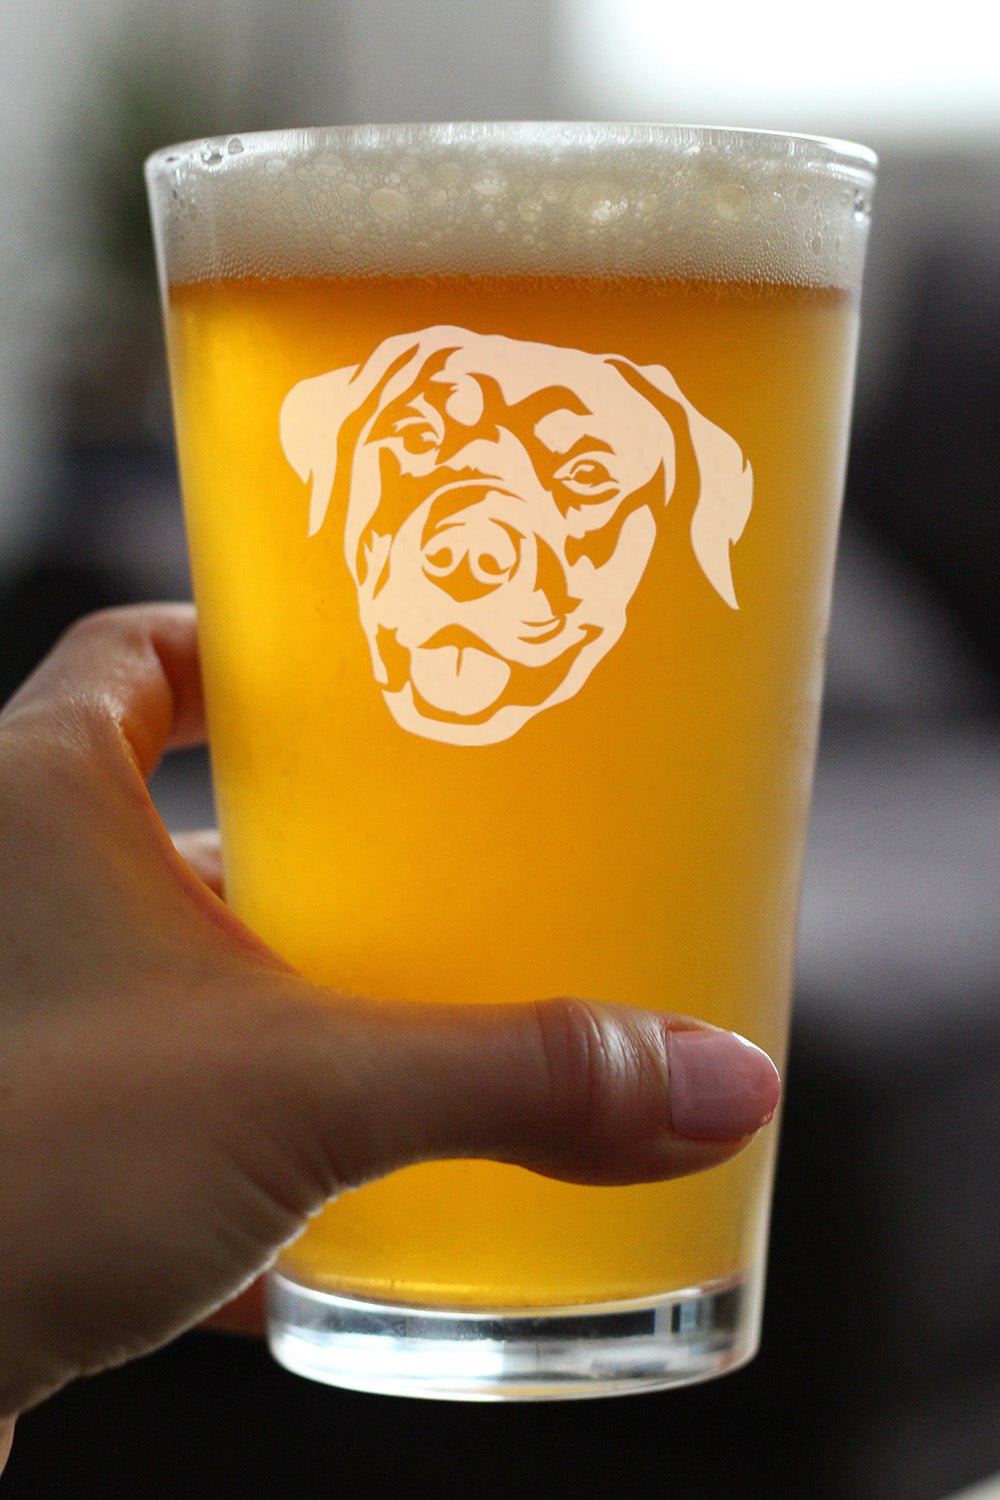 Happy Rottweiler - Pint Glass for Beer - Fun Unique Rottweiler Themed Dog Gifts and Party Decor for Women and Men - 16 oz